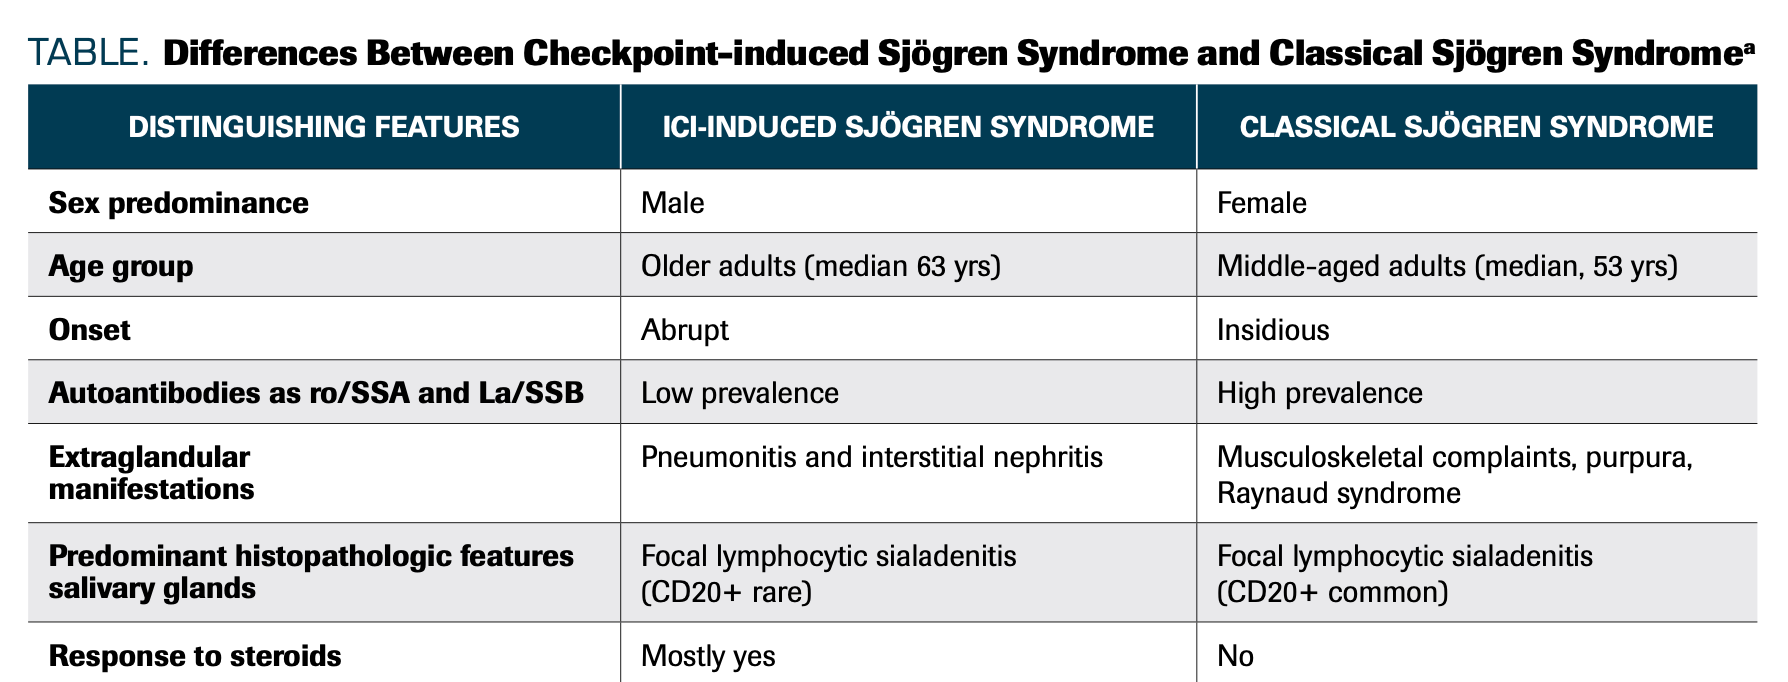 TABLE. Differences Between Checkpoint-induced Sjögren Syndrome and Classical Sjögren Syndromea